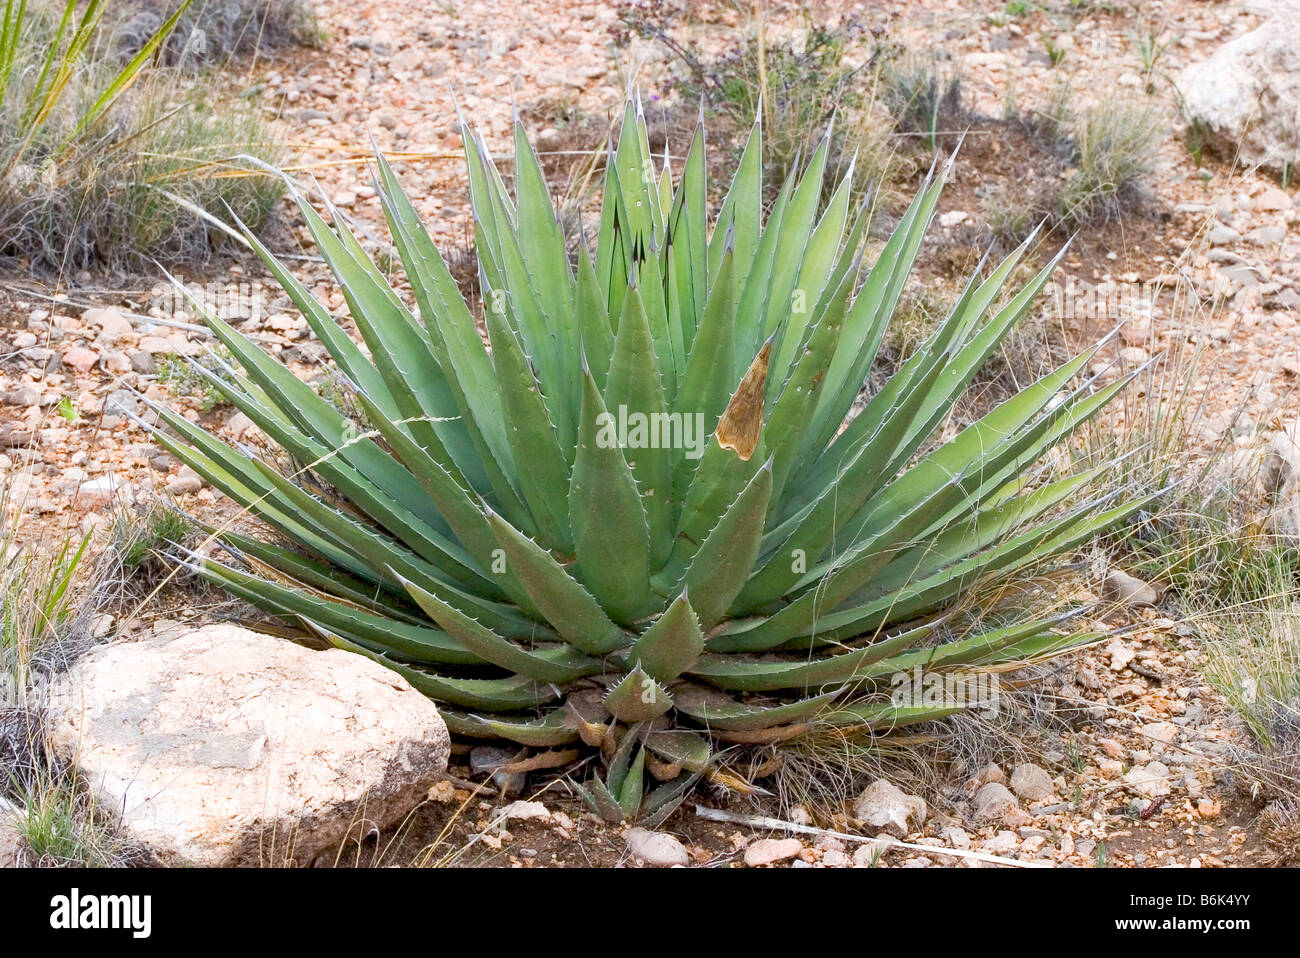 Slimfoot Agave Agave gracilipes Carlsbad New Mexico United States 8 April Plant Agavaceae Stock Photo